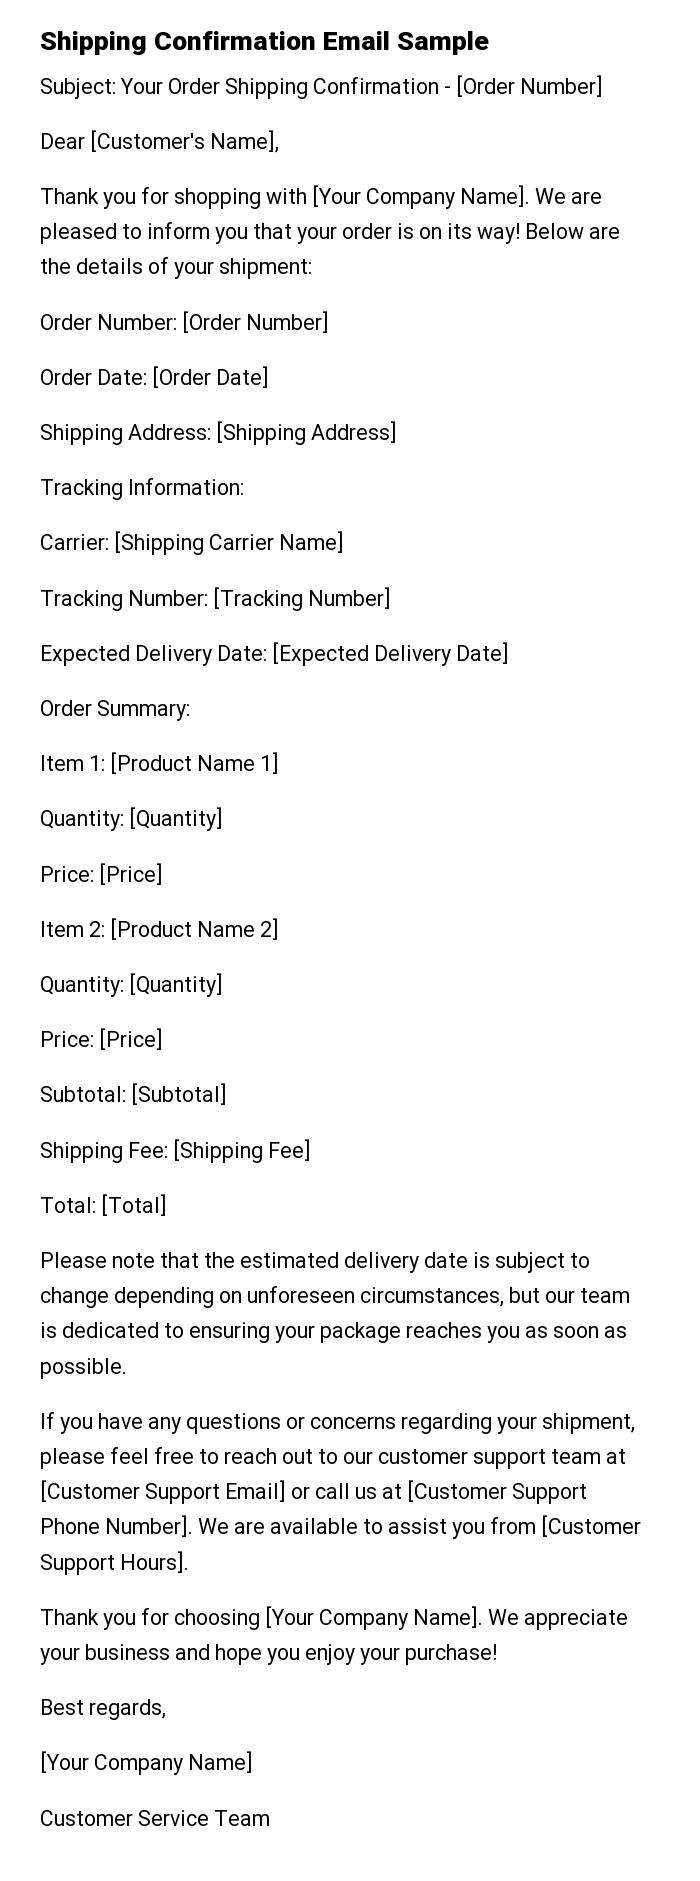 Shipping Confirmation Email Sample